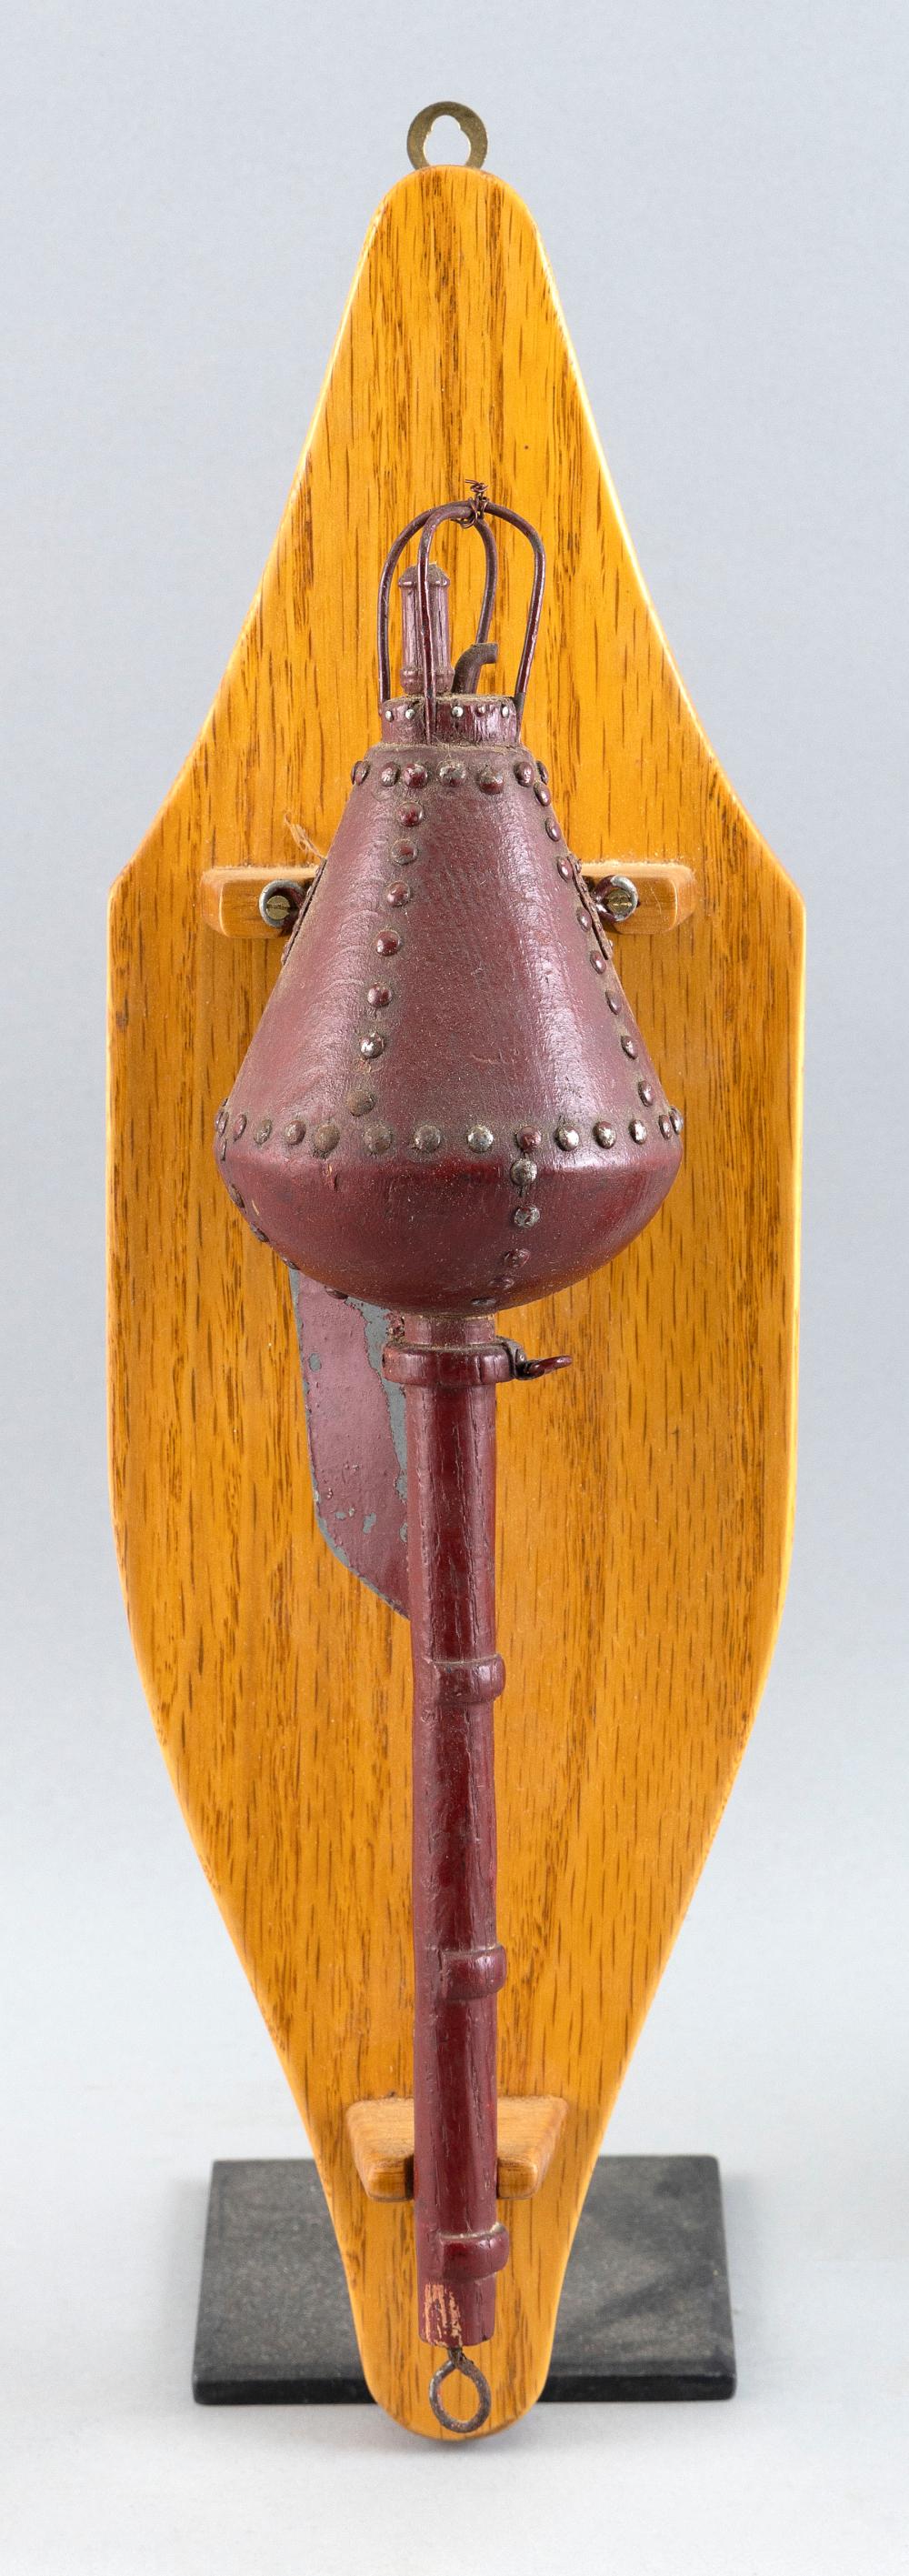 MOUNTED MODEL OF A RED NUN BUOY